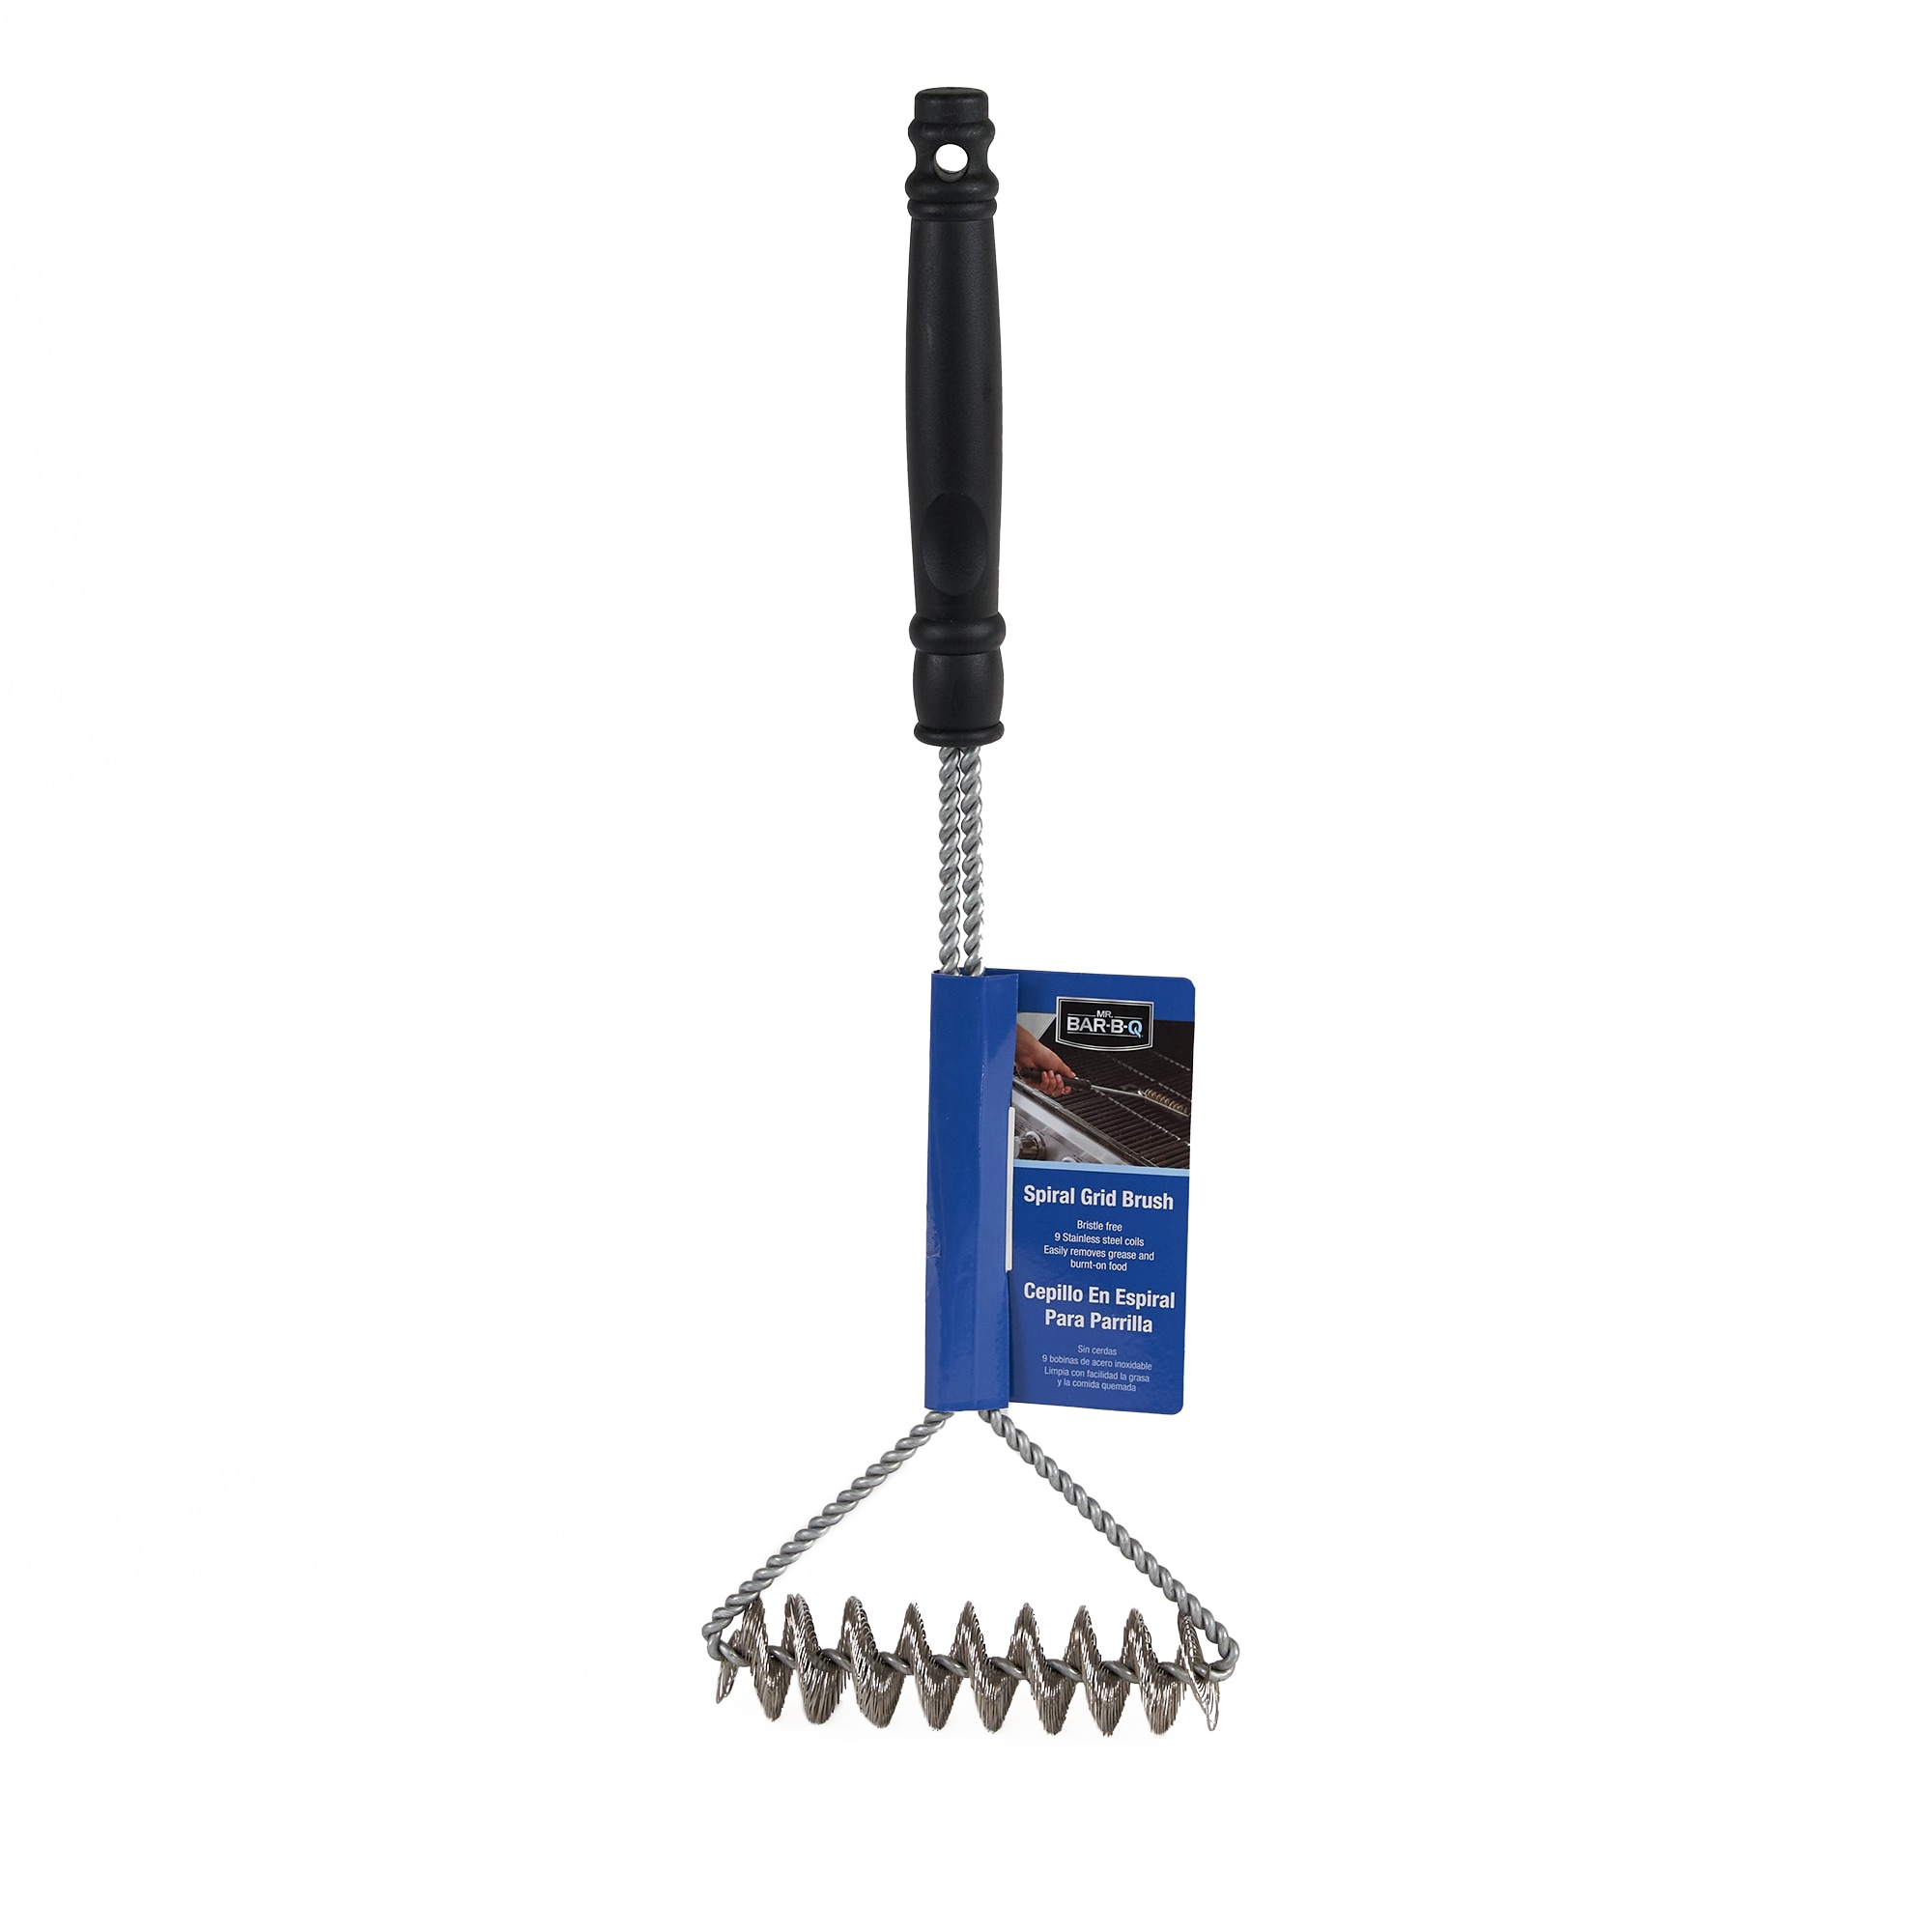 Grillers Choice Commercial Grill Brush - 2 Headed Double Helix Coils,  Bristle Free, 18 Long Handle, 3 in 1 Professional Barbecue Cleaner,  Stainless